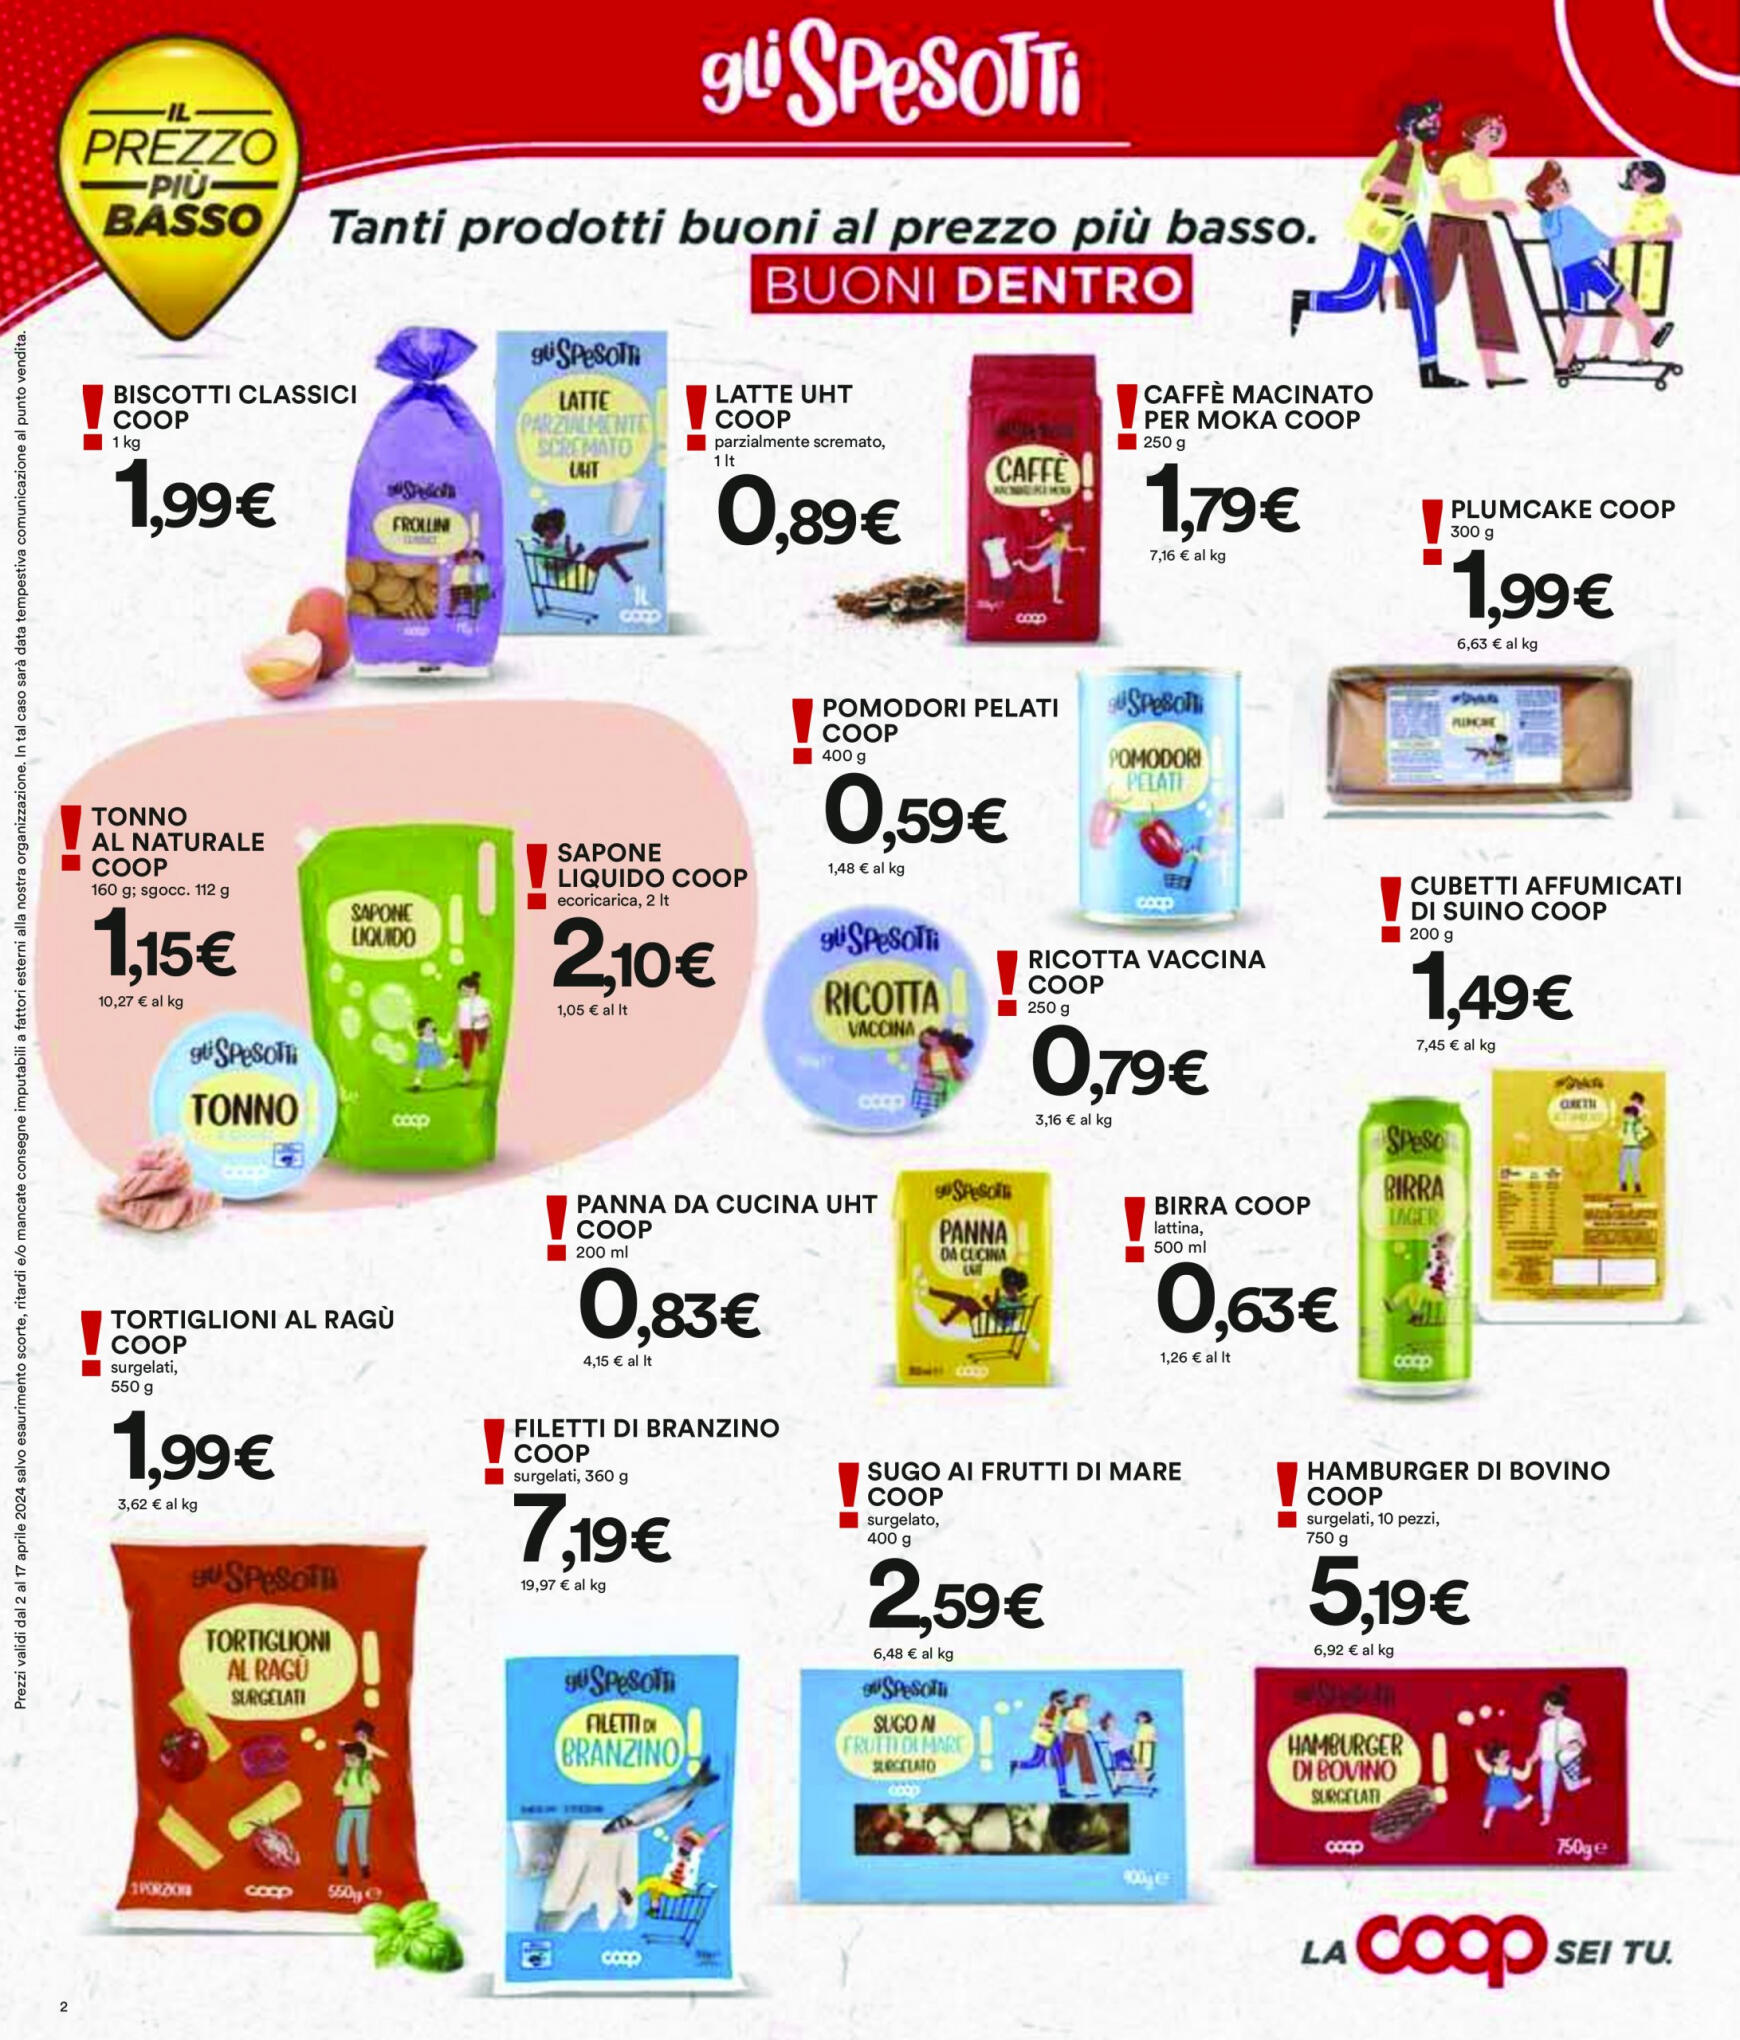 coop - Nuovo volantino Coop 02.04. - 17.04. - page: 2